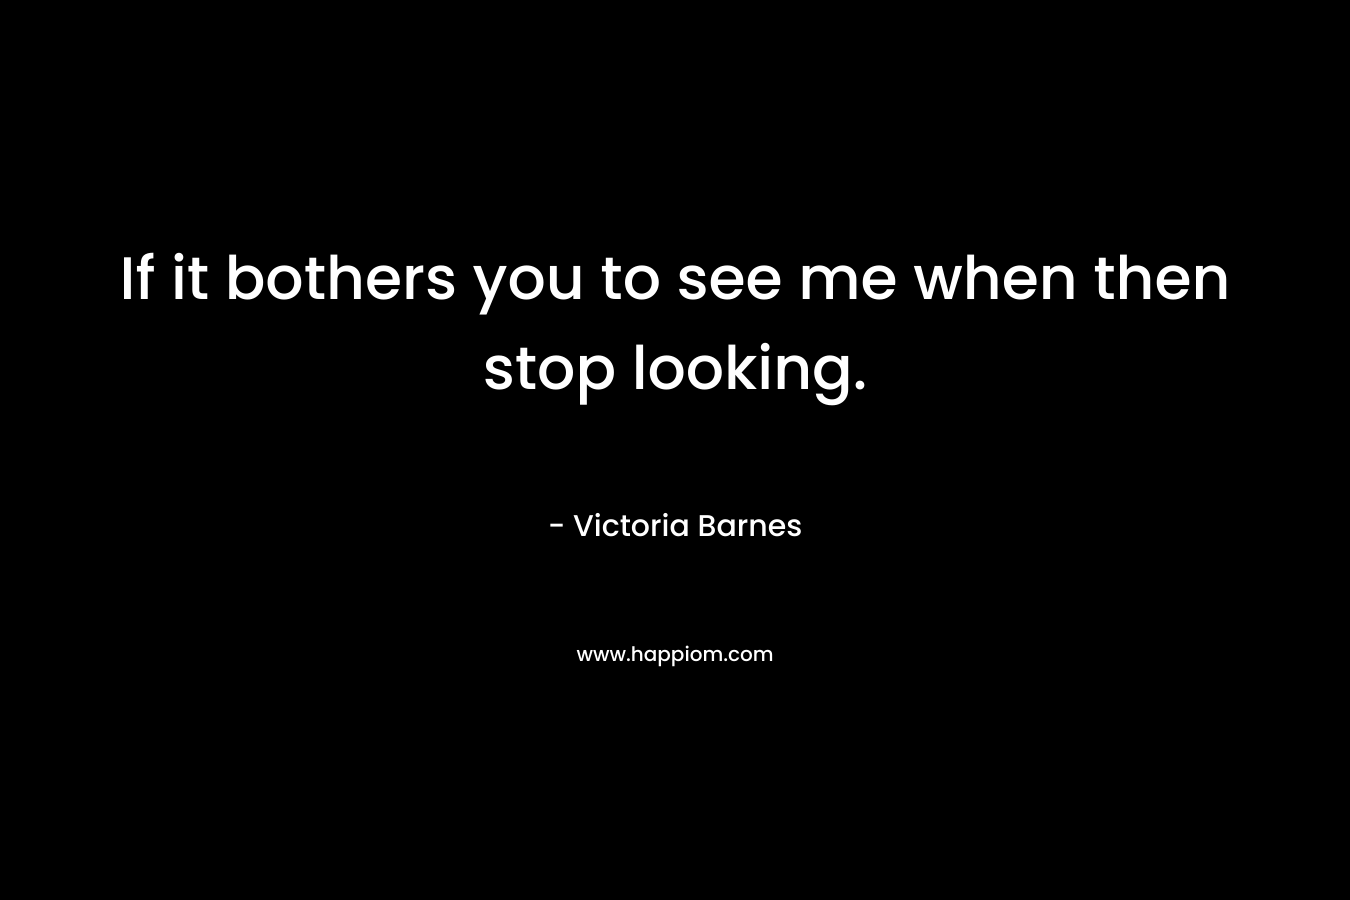 If it bothers you to see me when then stop looking. – Victoria Barnes